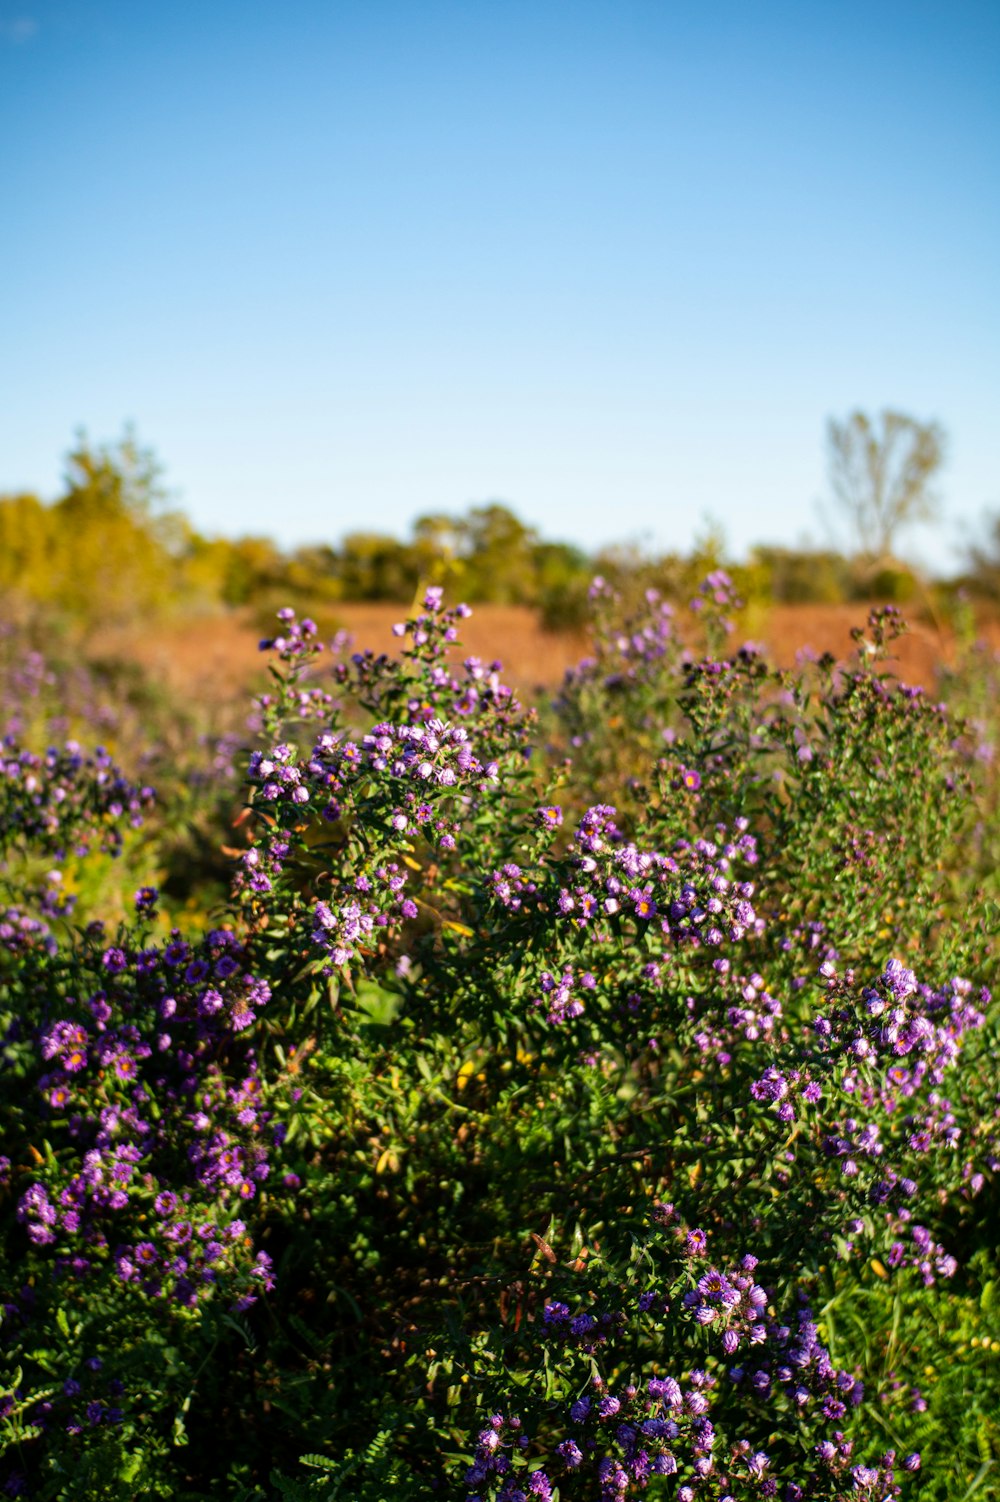 a bush with purple flowers in the middle of a field